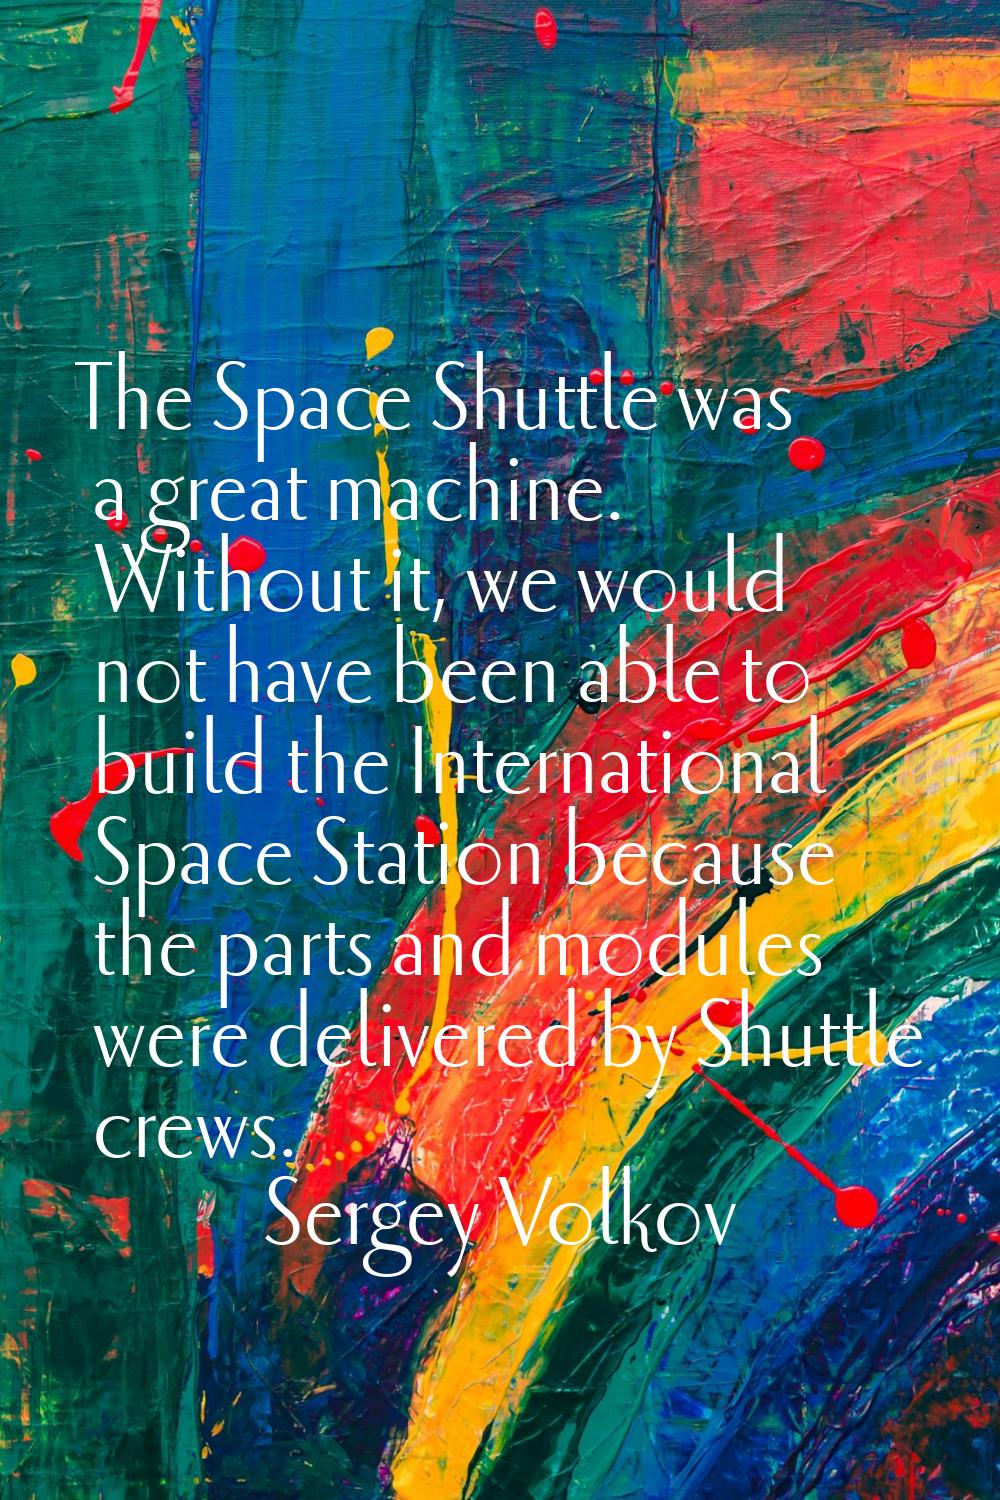 The Space Shuttle was a great machine. Without it, we would not have been able to build the Interna